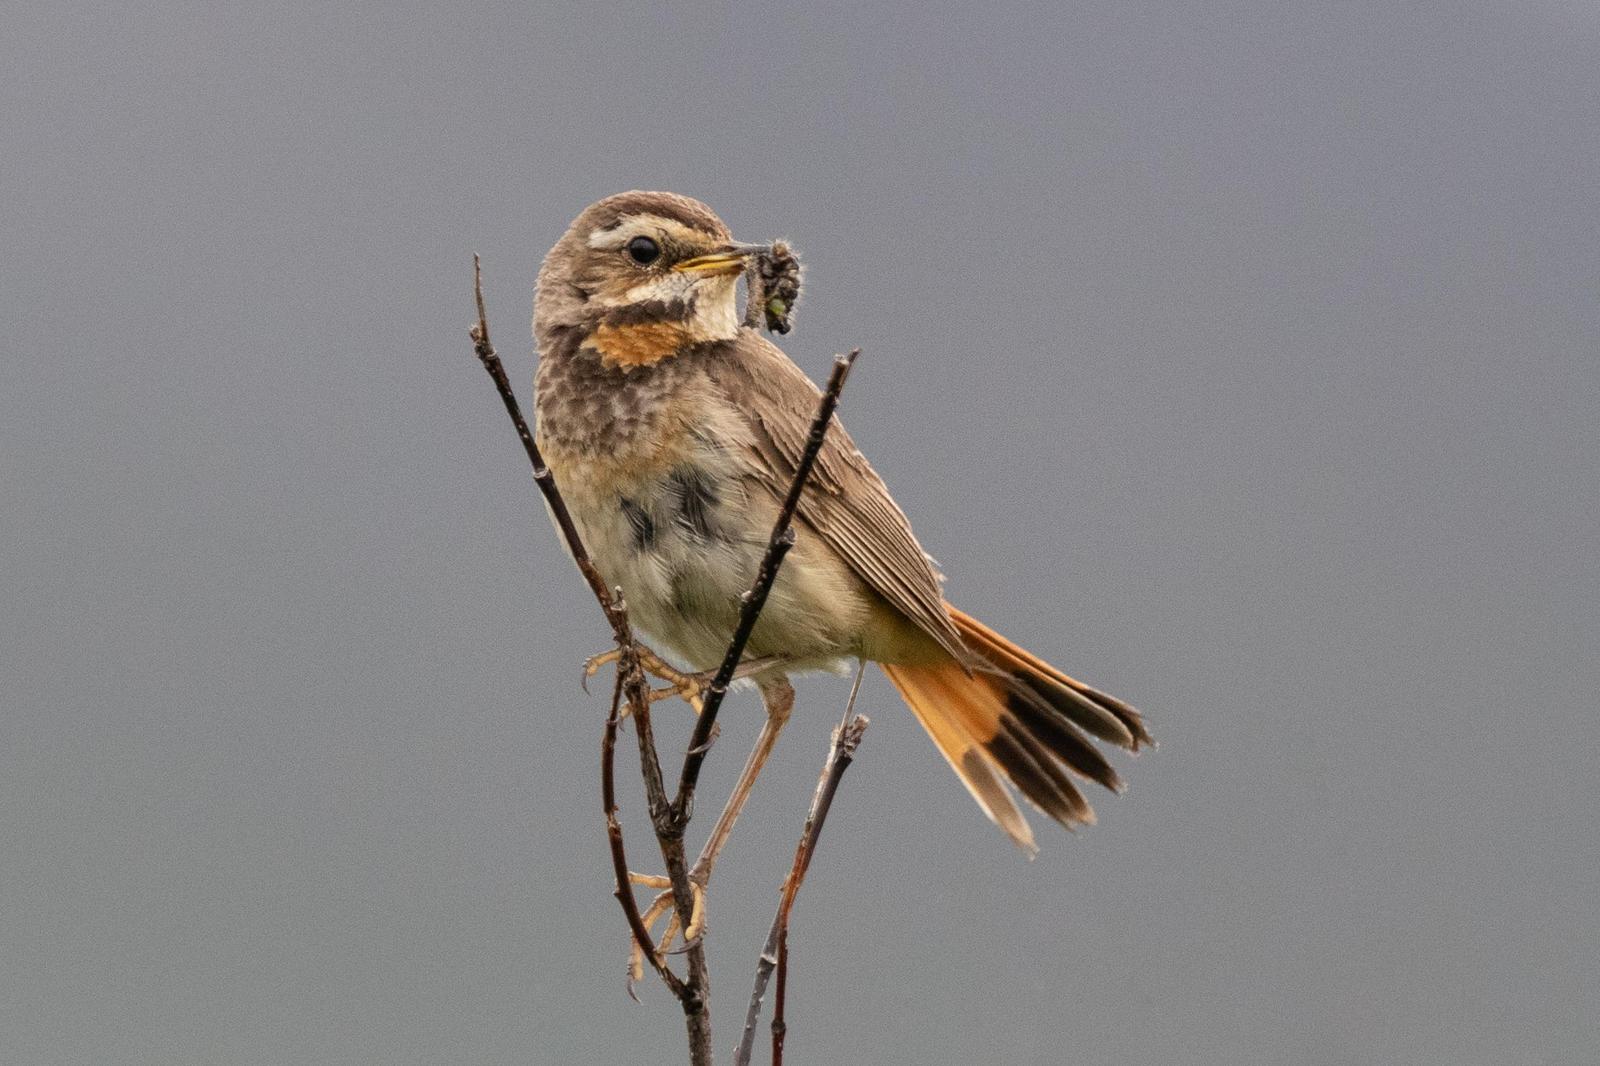 Bluethroat Photo by Kate Persons